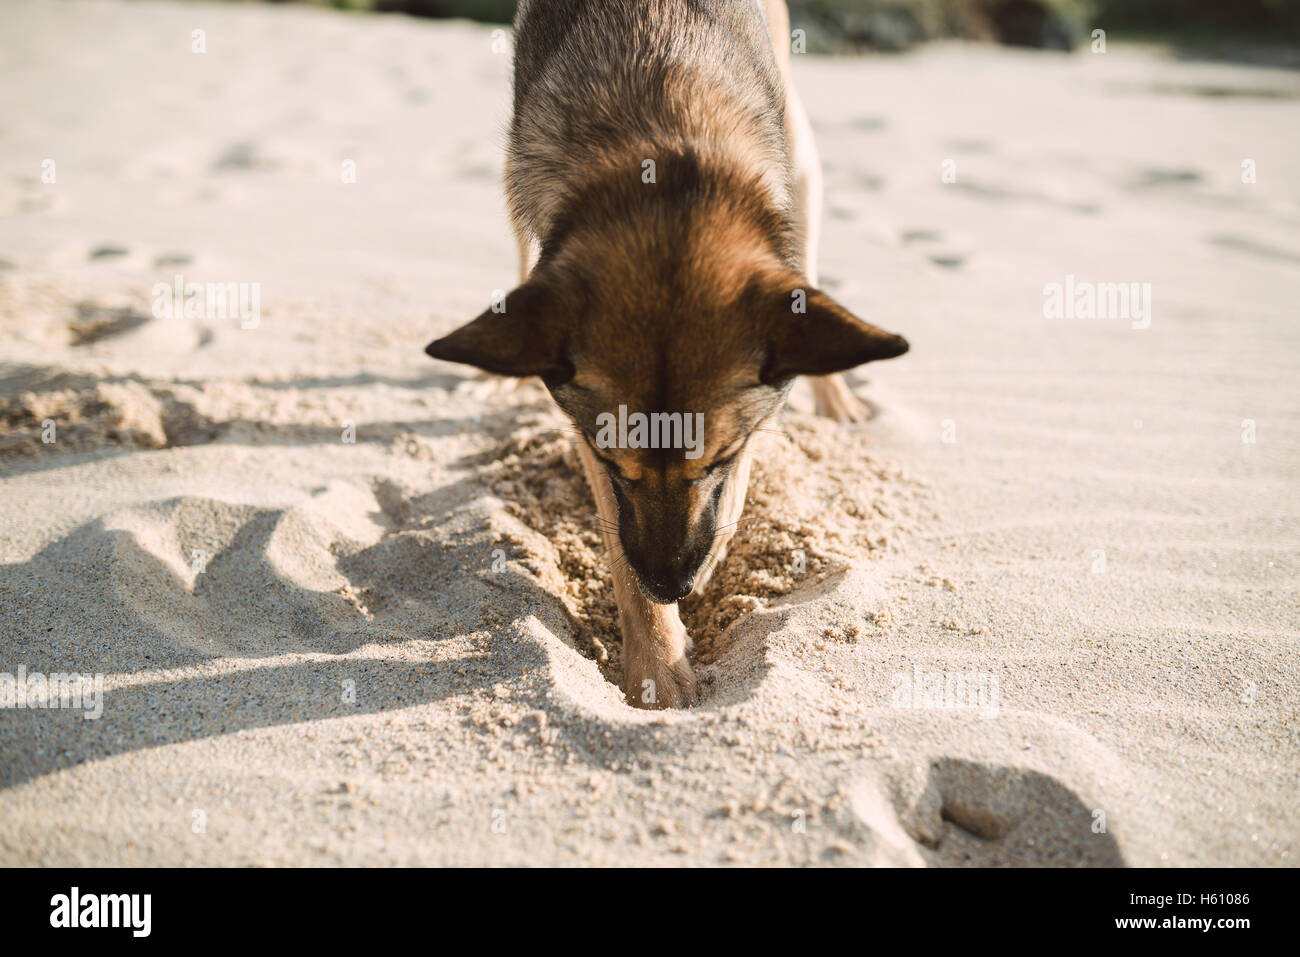 Mongrel dog digging in the sand of the beach. Stock Photo